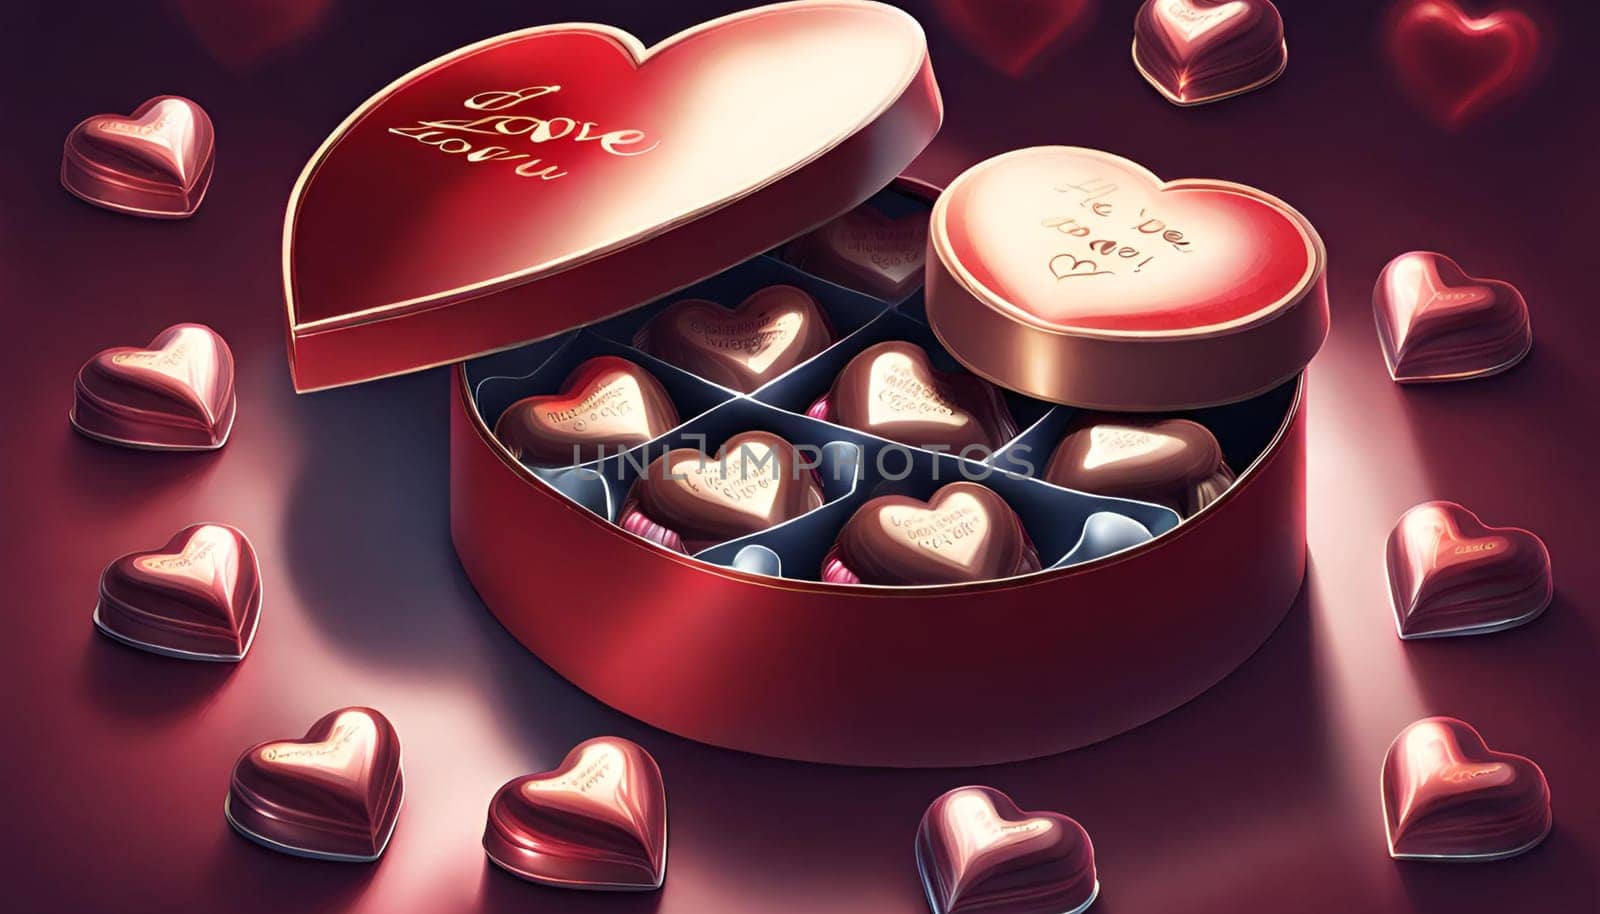 valentine's Day. A heart-shaped box of chocolates wrapped in red foil.Happy Valentine's Day c